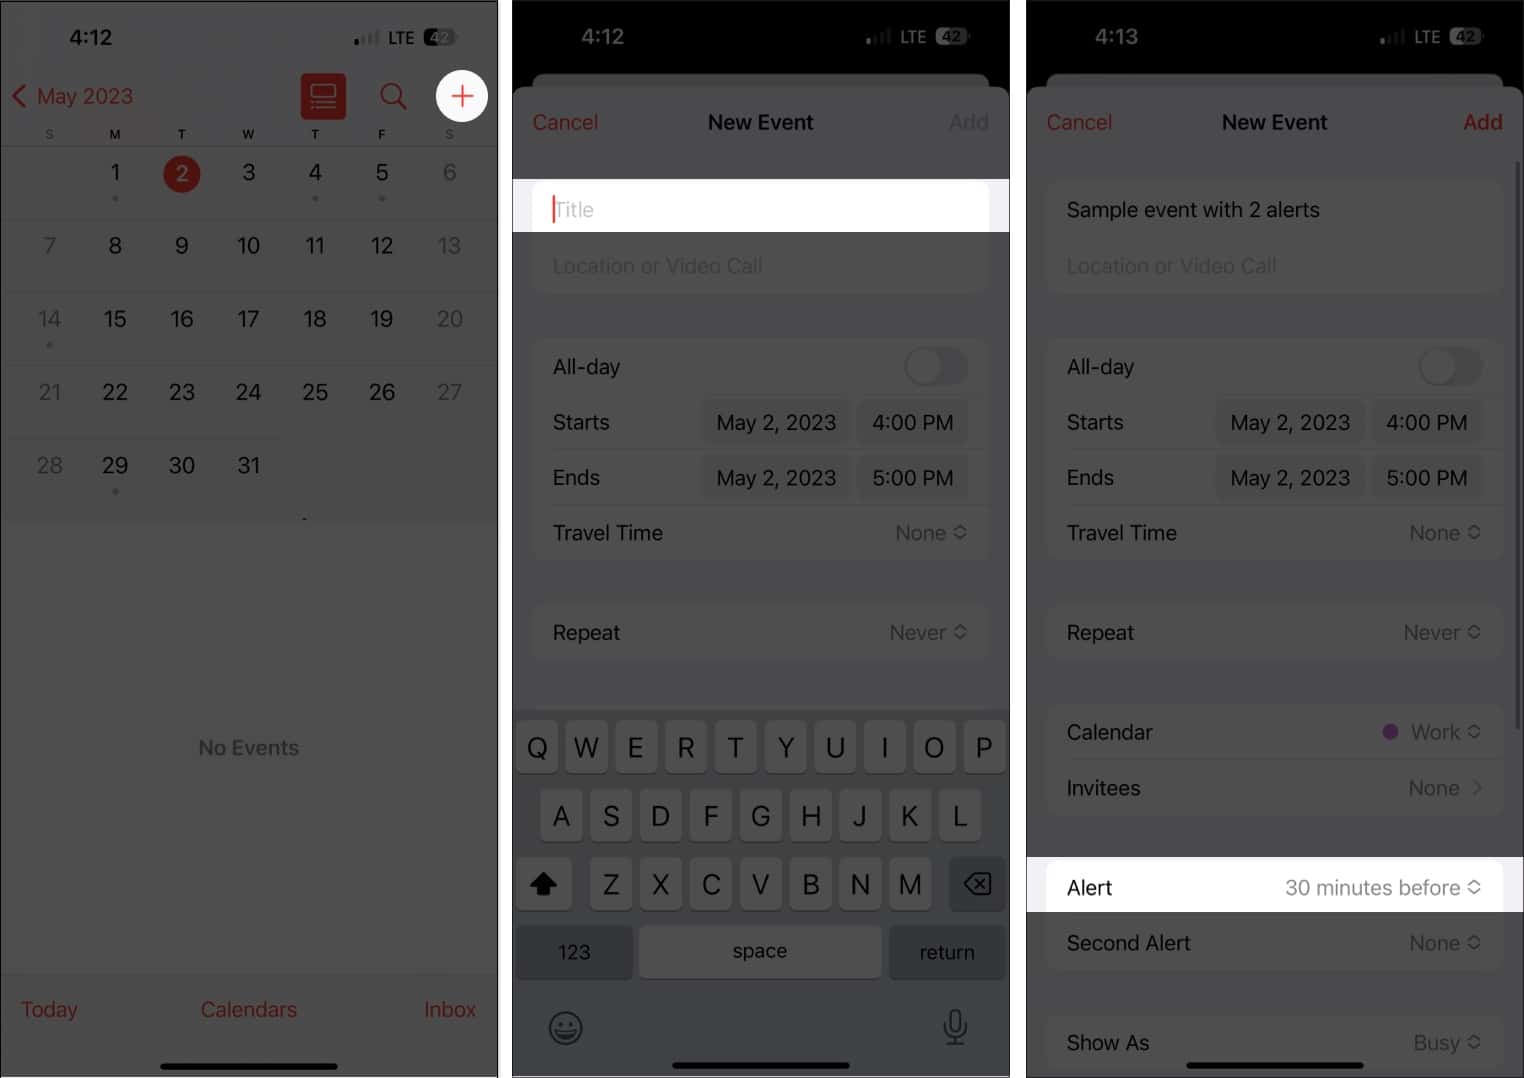 Touch the + sign, enter a name, and go to the Alarm option in the Calendar app.